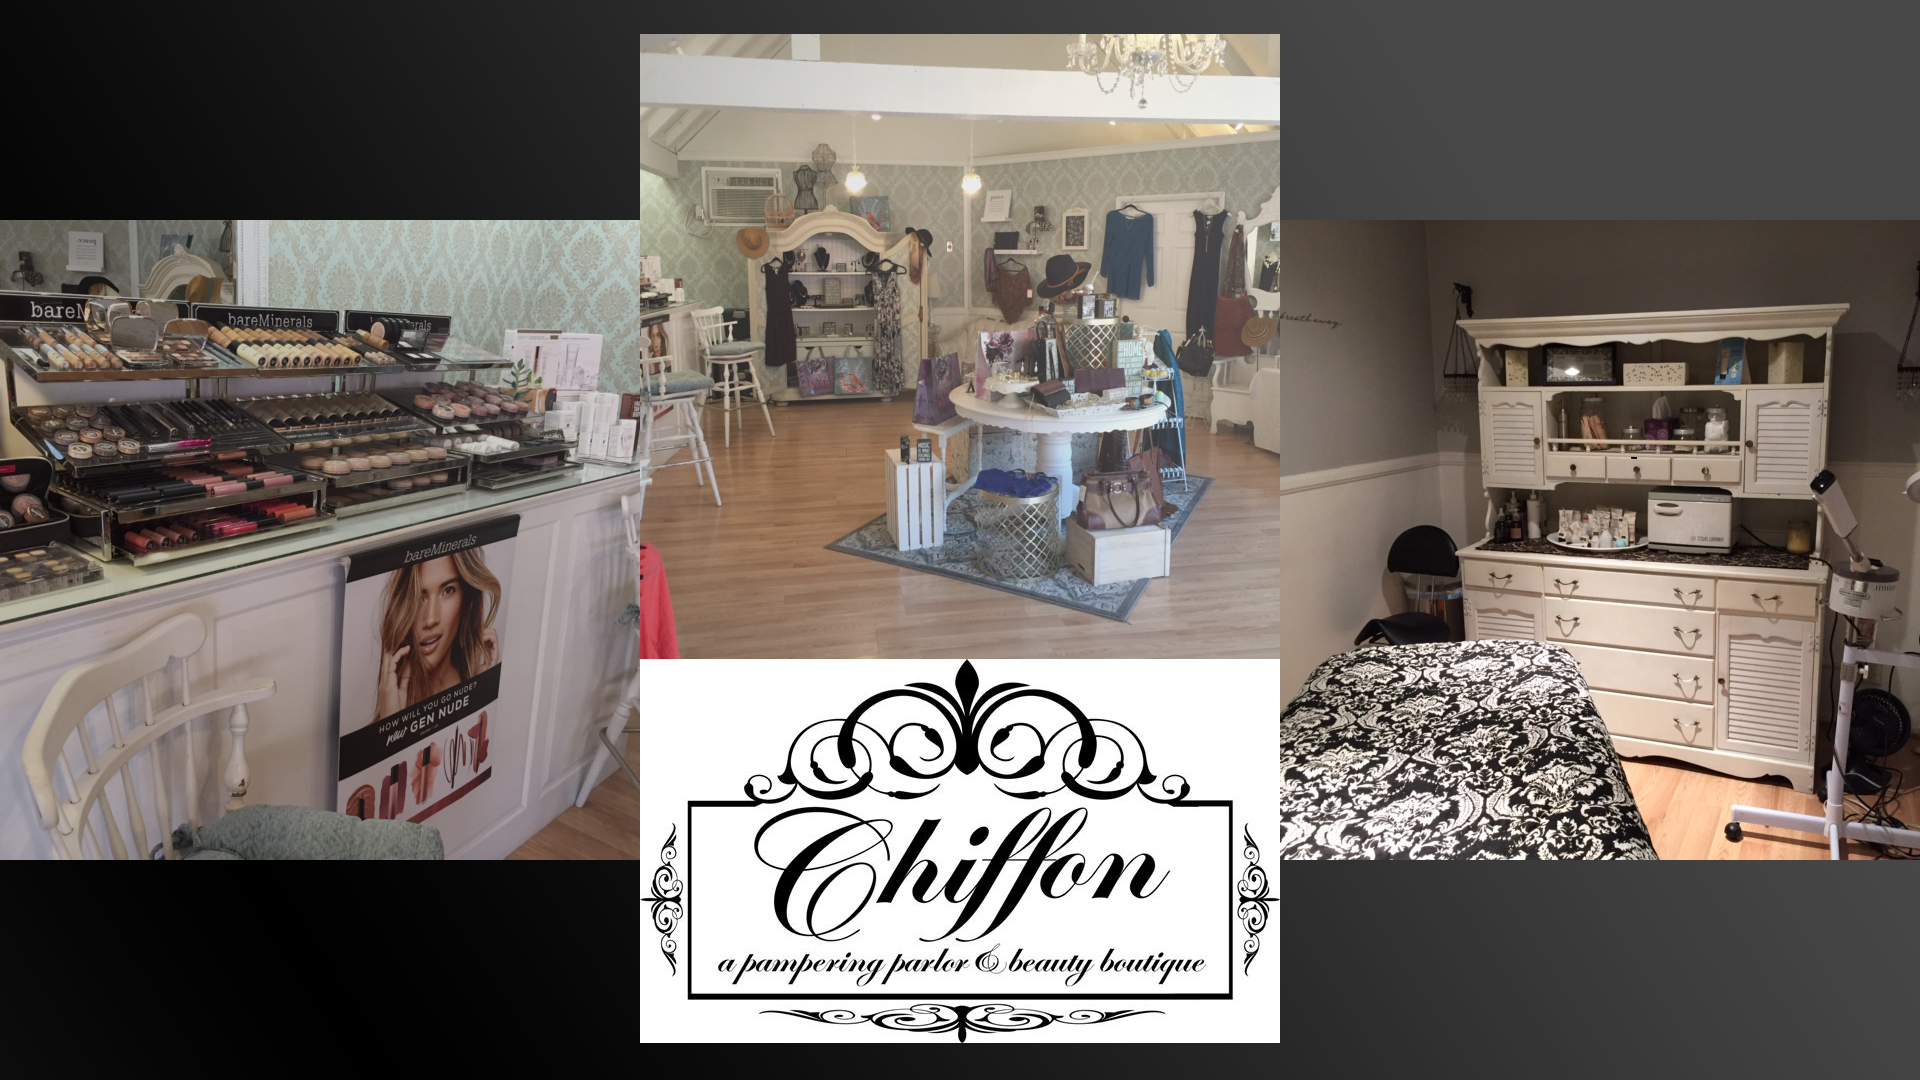 Chiffon “A Pampering Parlor and Beauty Boutique”